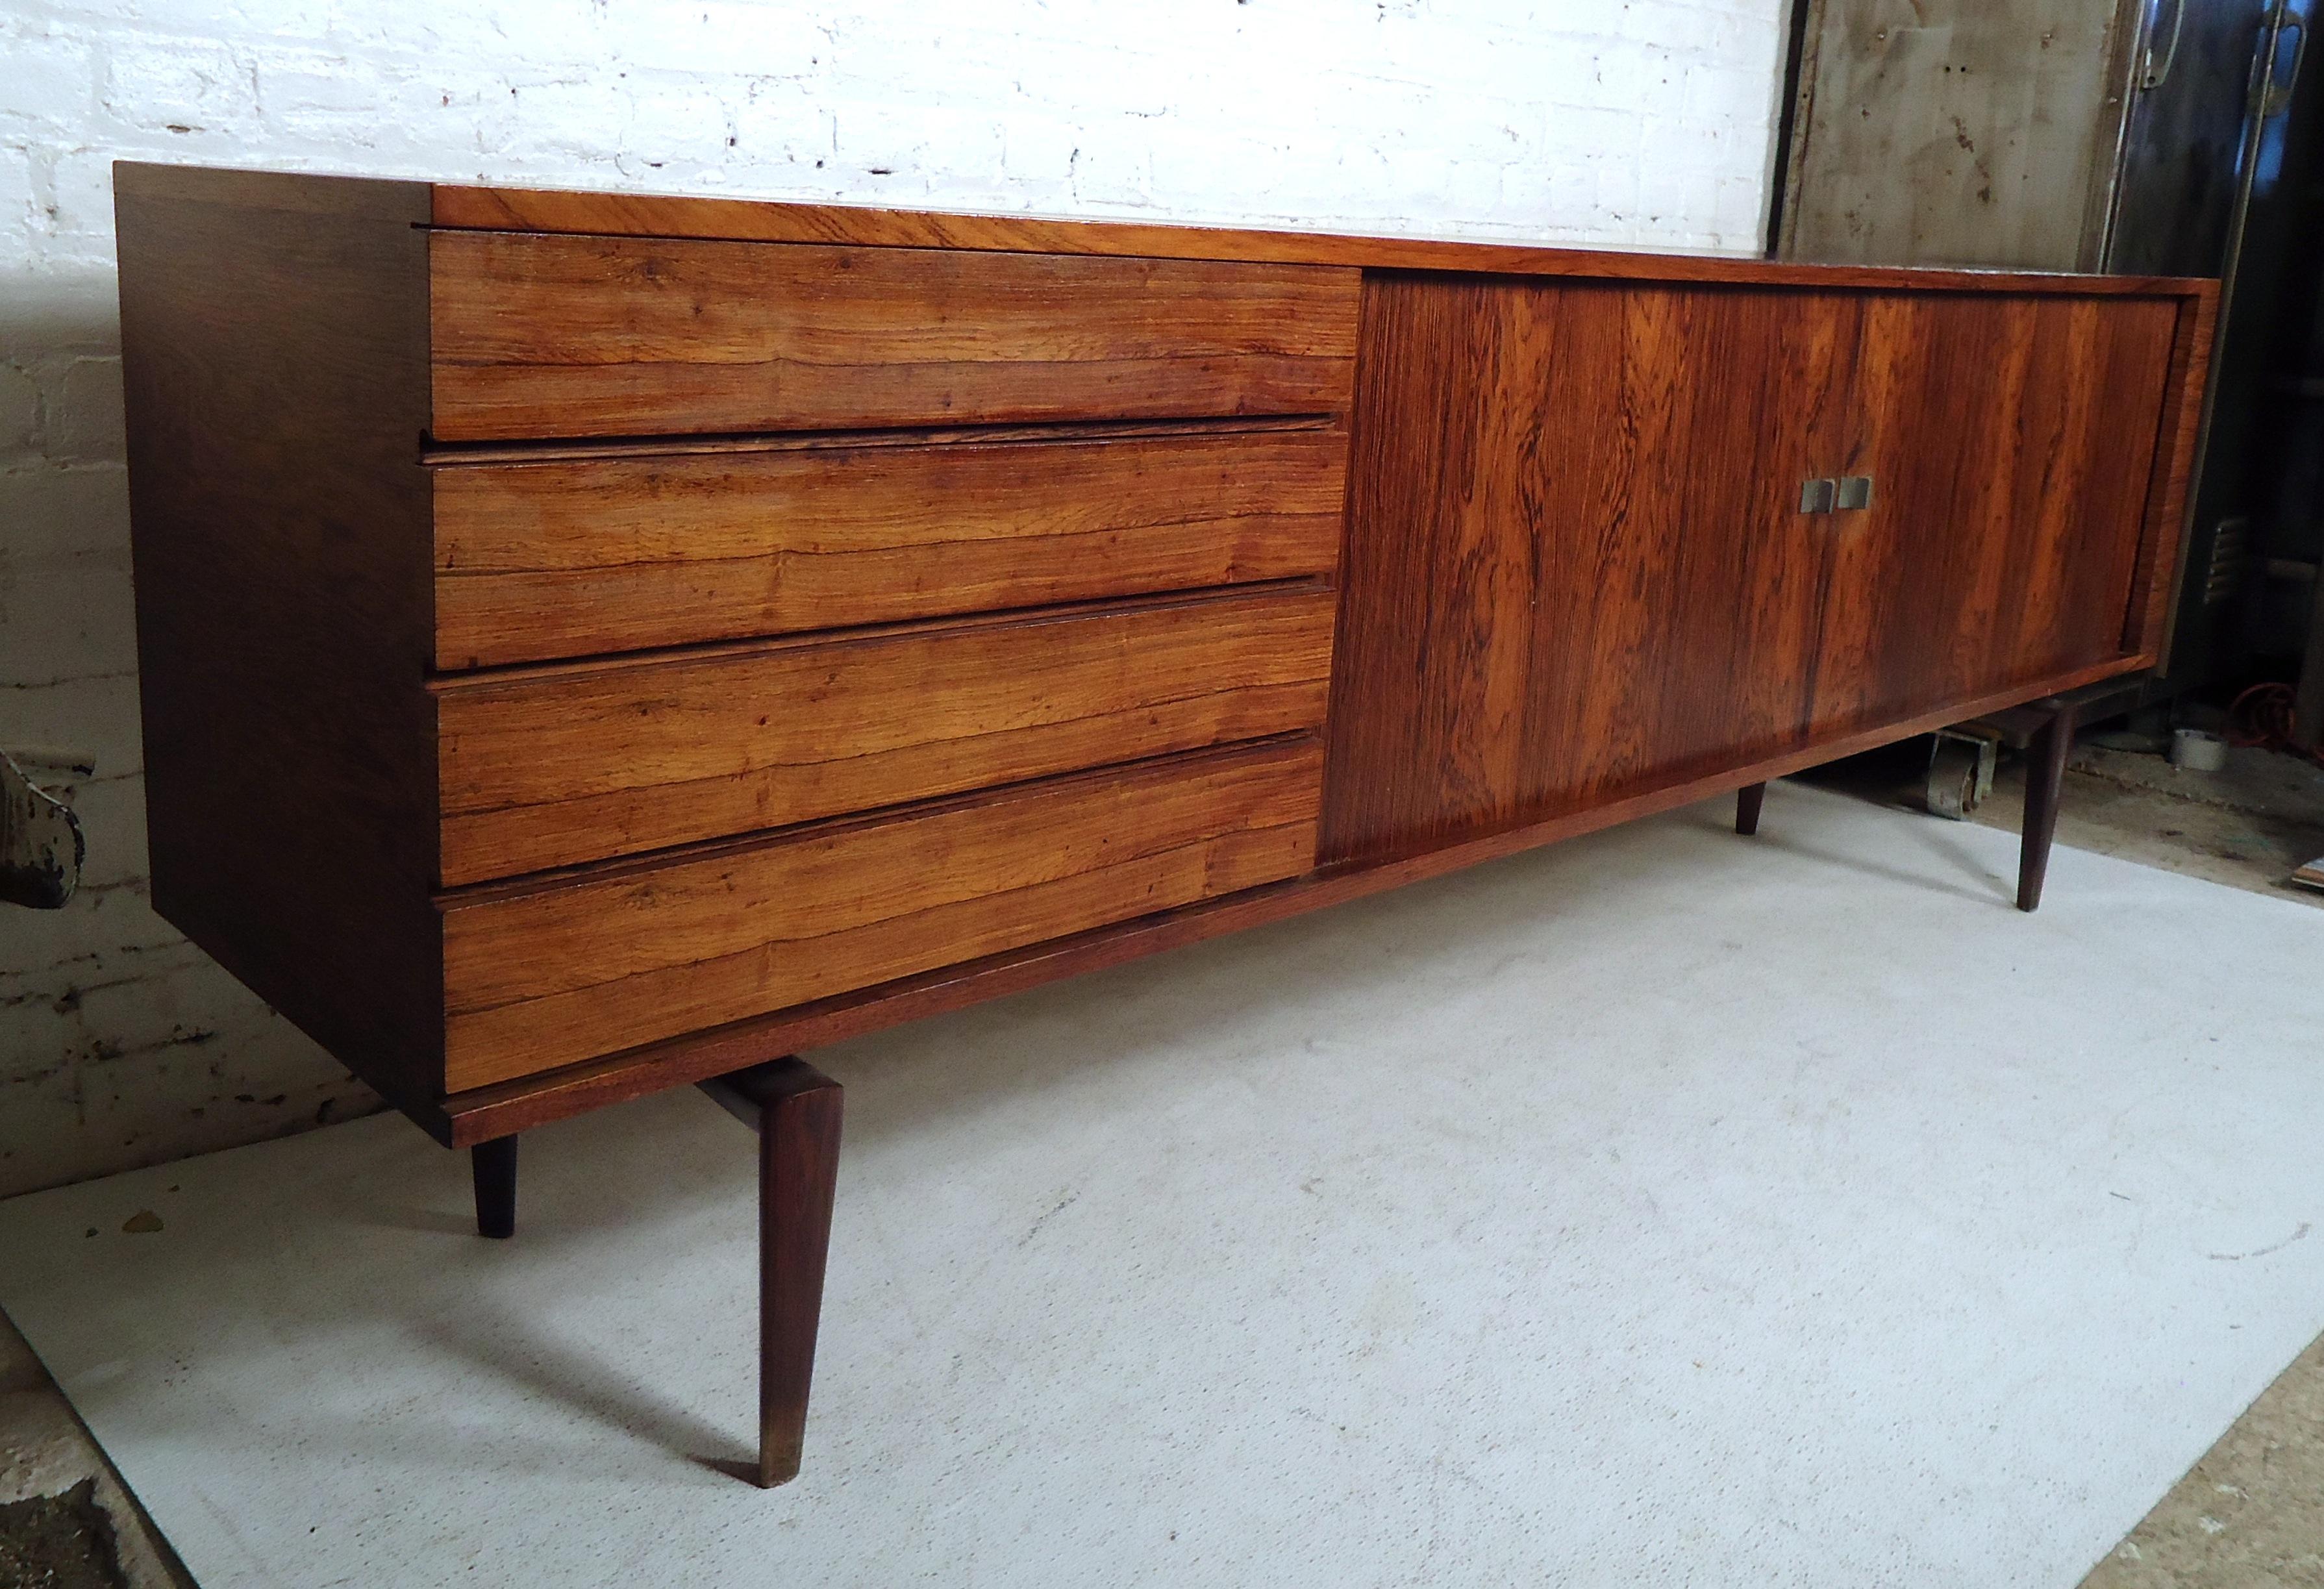 This stunning vintage modern sideboard offers plenty of room for storage within its four drawers and large storage compartments with shelves hidden behind its sliding doors. An elegant rosewood wood grain throughout and sturdy legs showing quality